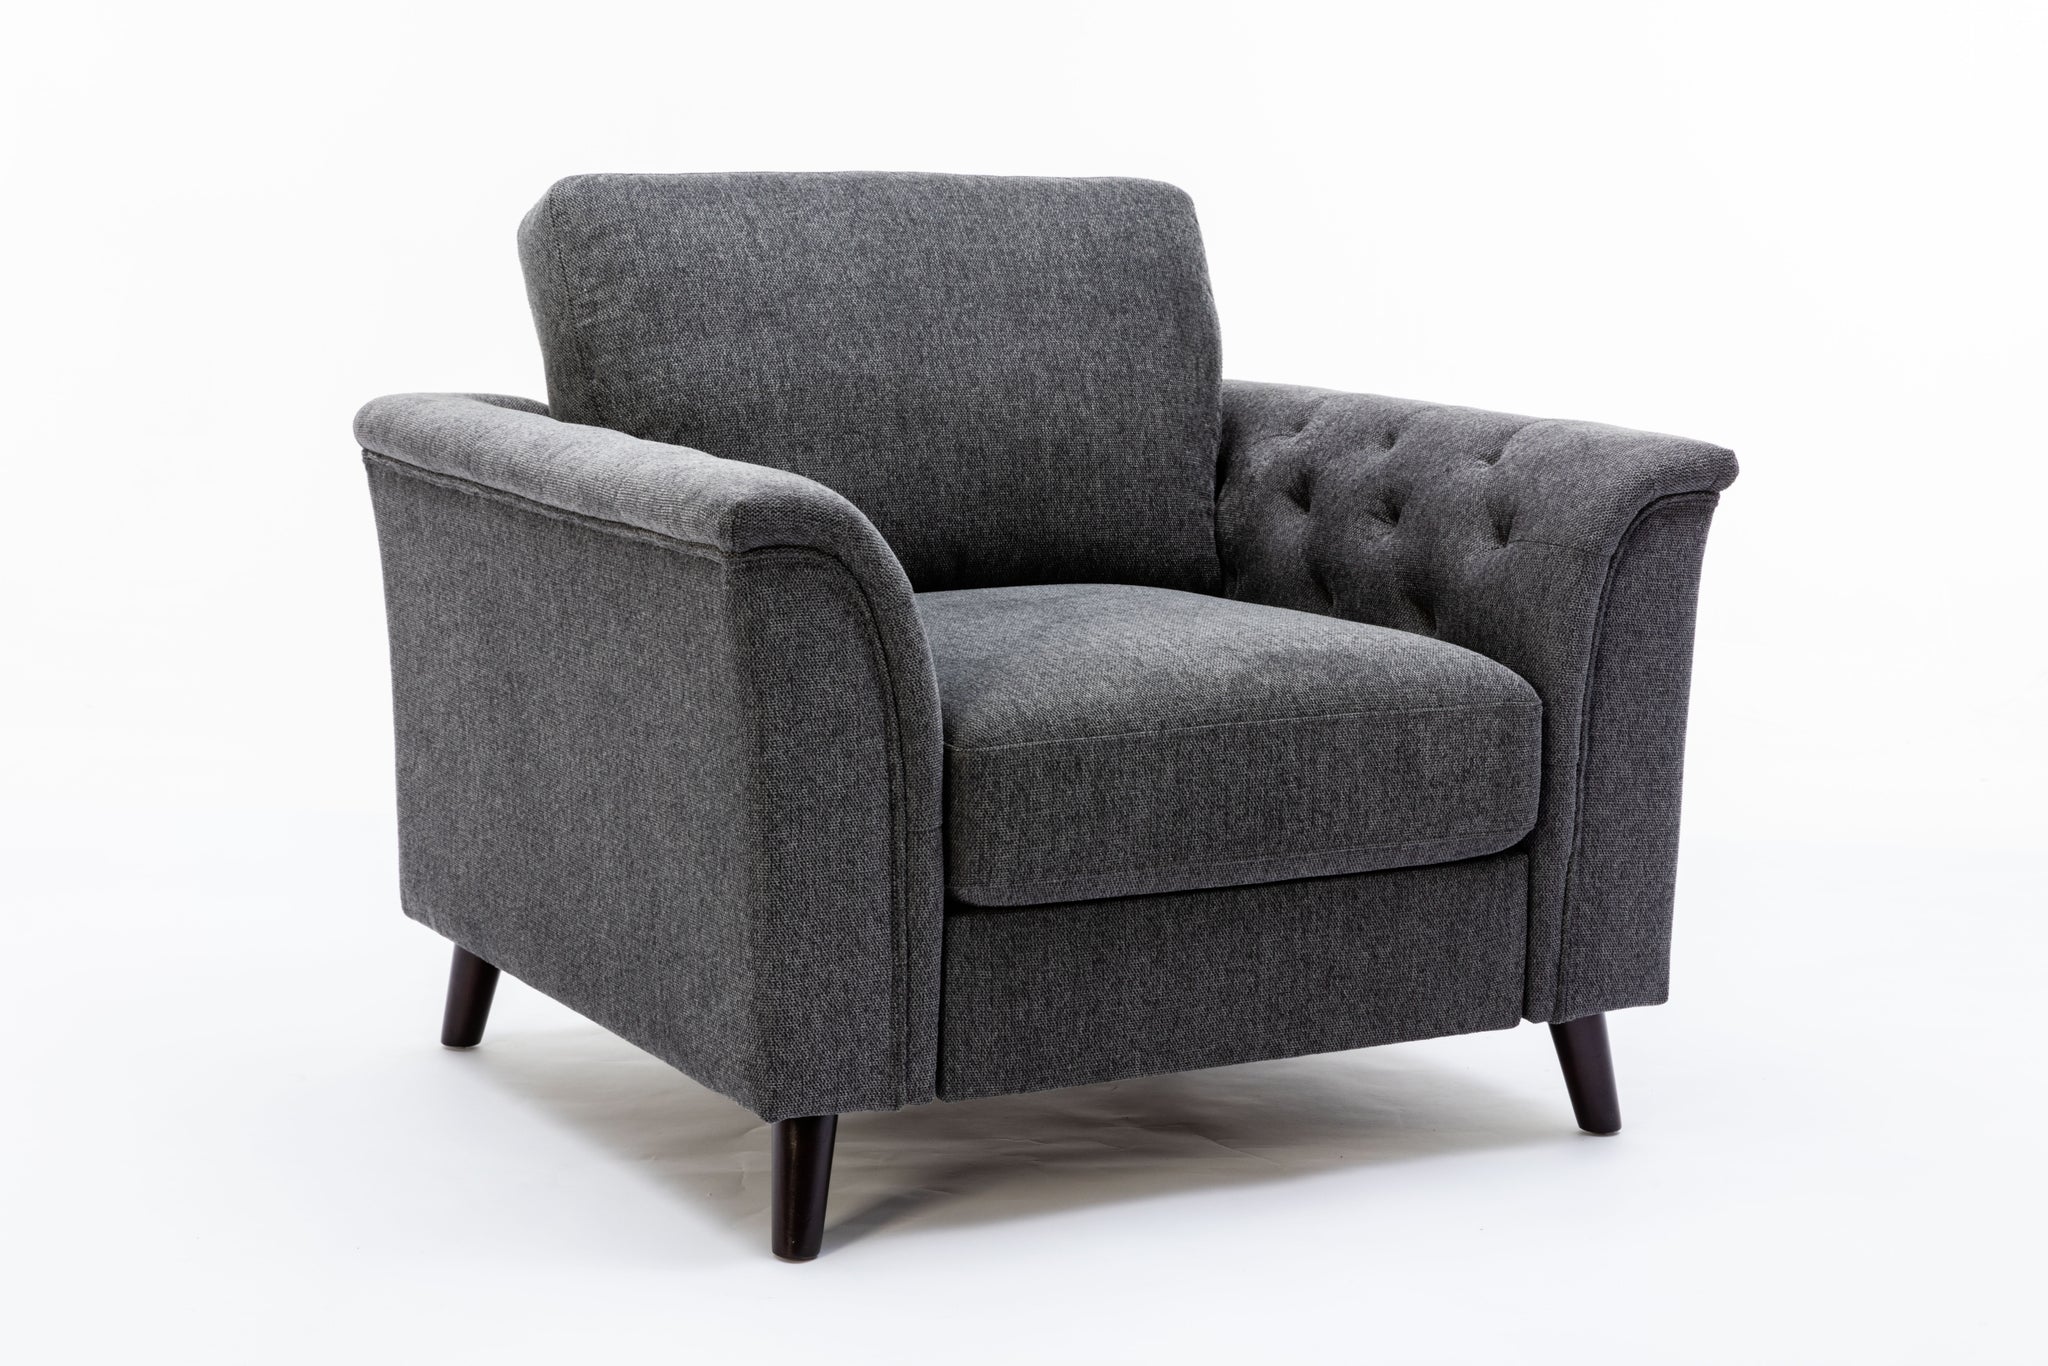 Stanton 36.5" Dark Gray Linen Chair with Tufted